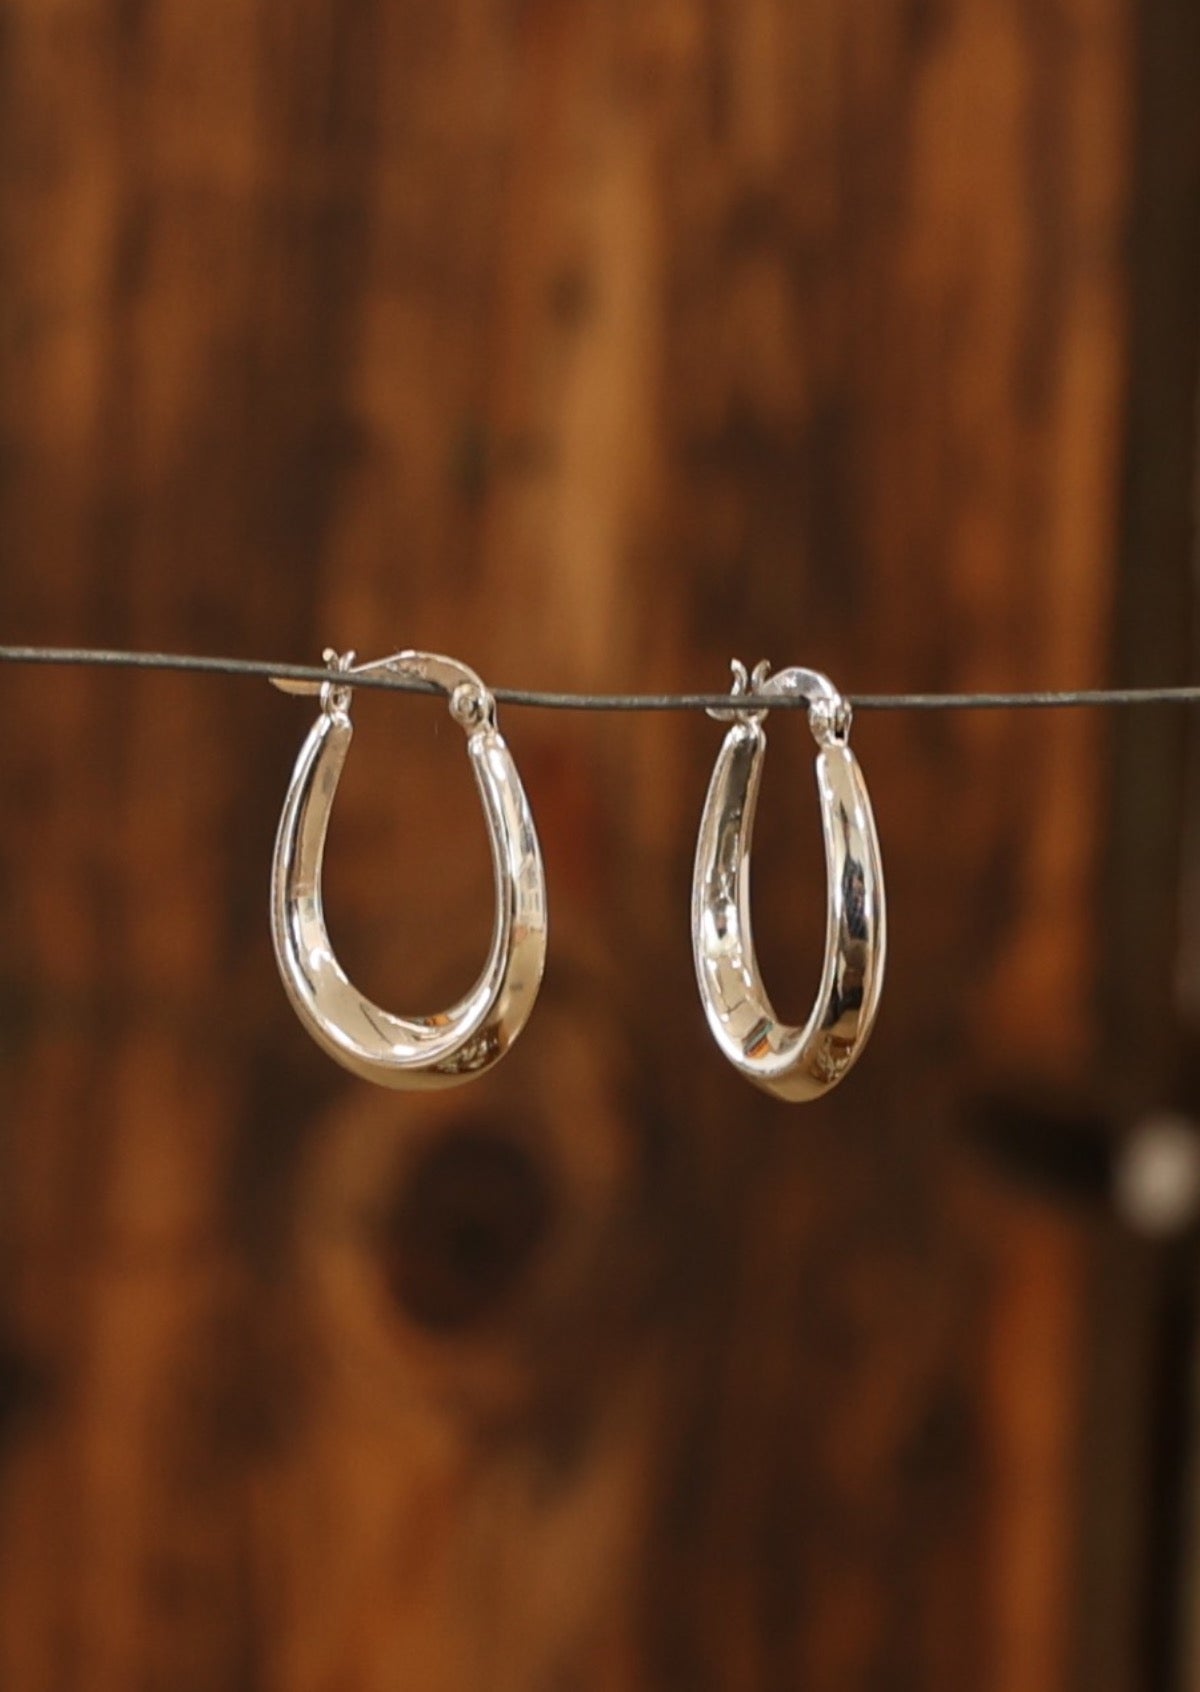 Approximately 19mm in width at base, and 27mm in length, with a maximum 5mm in thickness, these hoops are secured with a hinged clasp